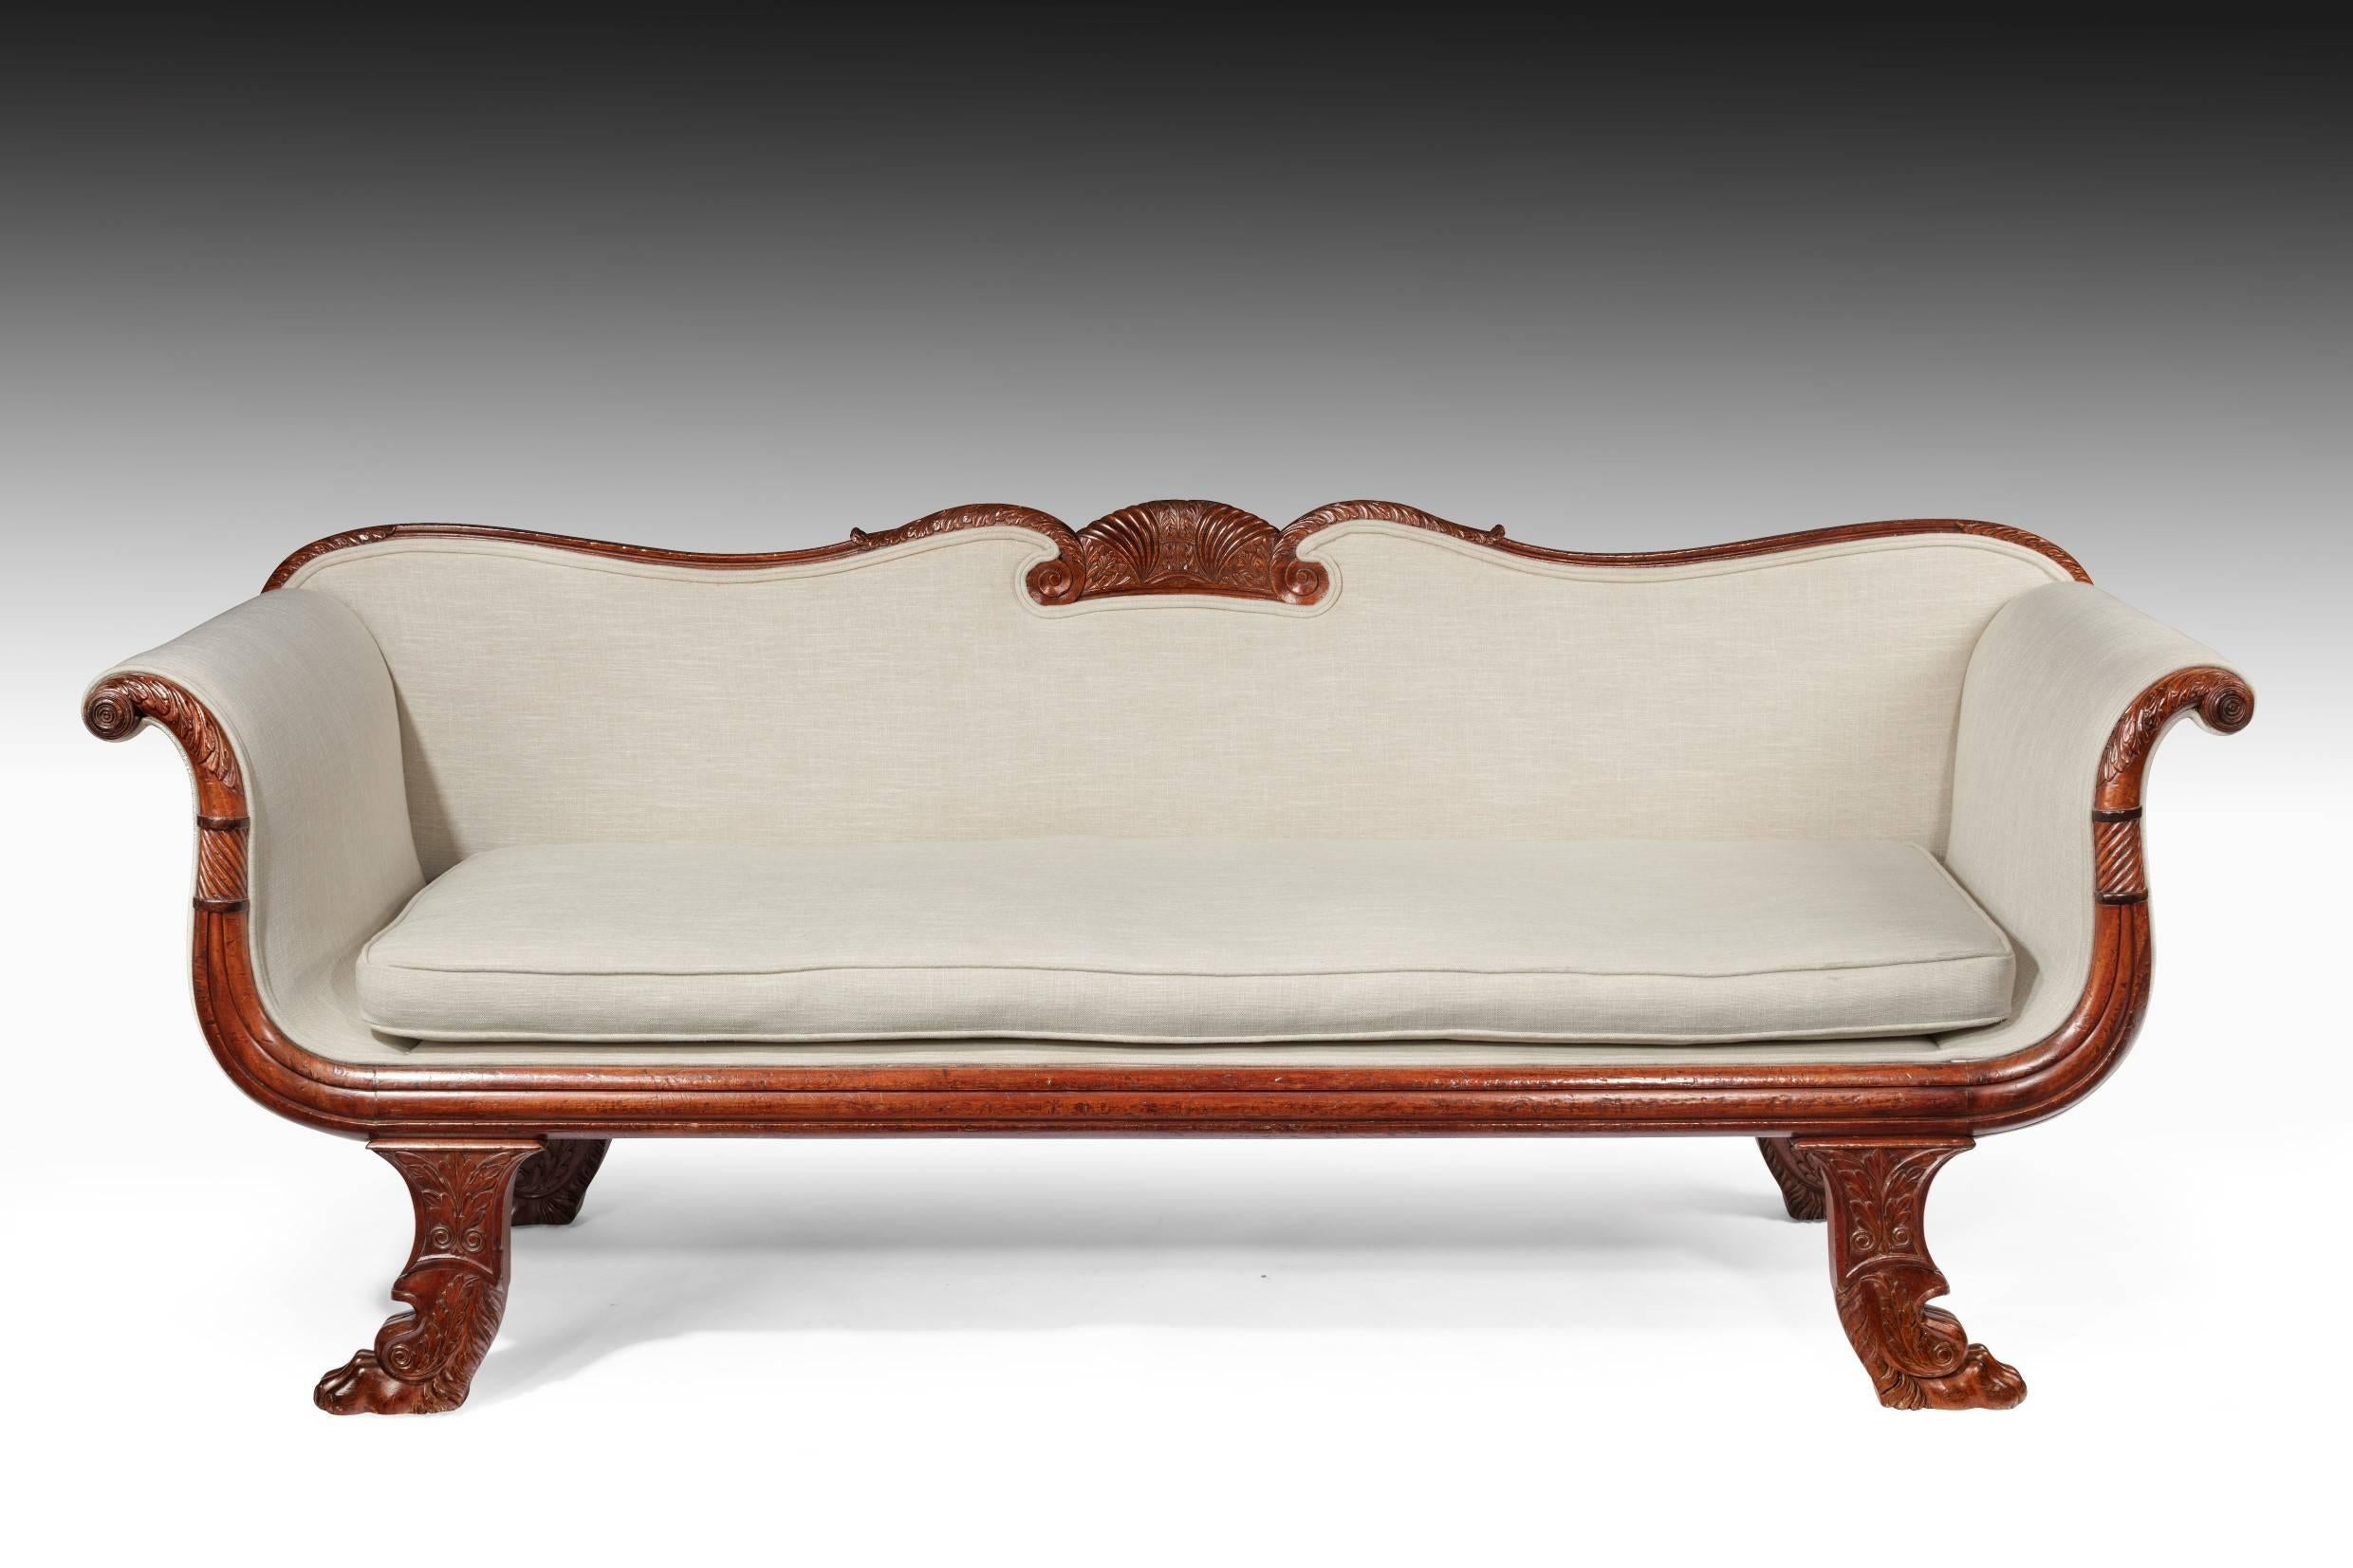 An elegant early 19th century mahogany sofa / couch dating to the late Regency / William IV period, circa 1830.
This very well drawn and elegant sofa has been constructed to the highest standards.
The crisply carved shaped back having a central